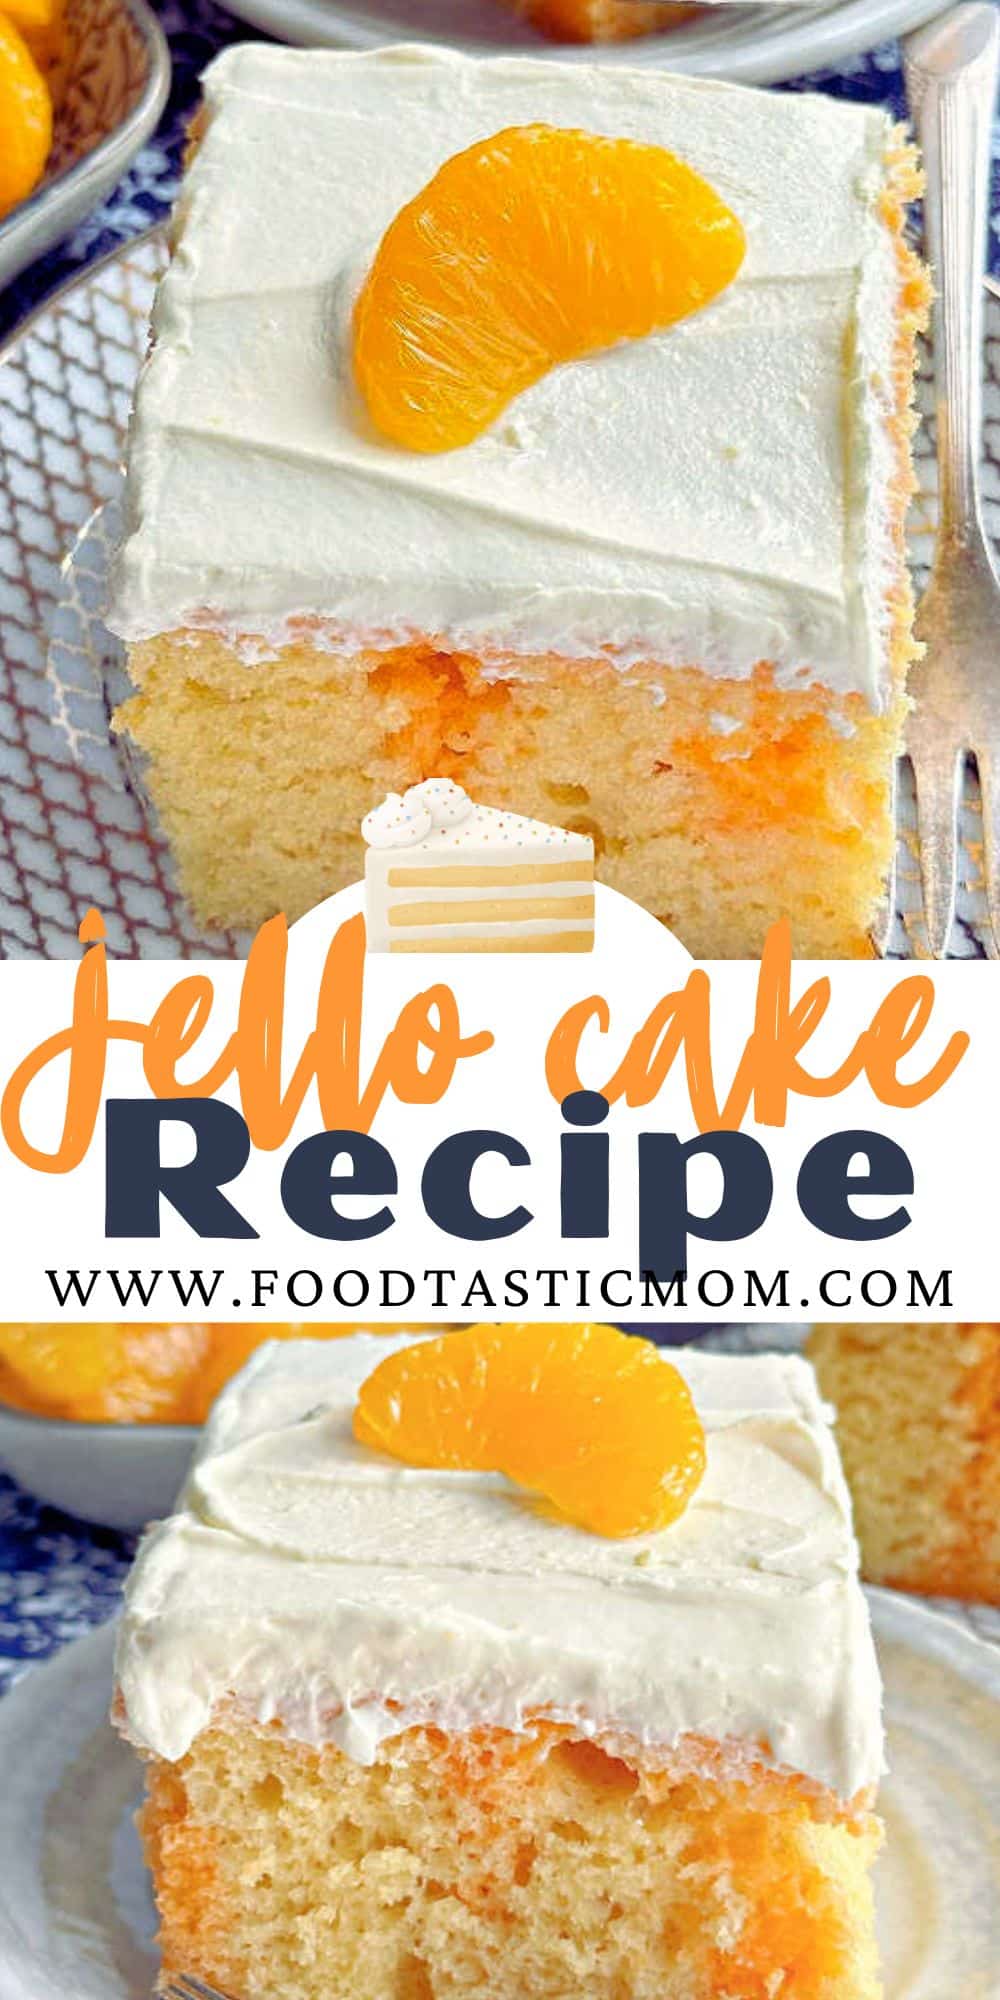 Jello cake is a vintage recipe that is a perfect dessert for family gatherings, sure to put a smile on everyone's face. A delicious cake that is so easy to make! via @foodtasticmom